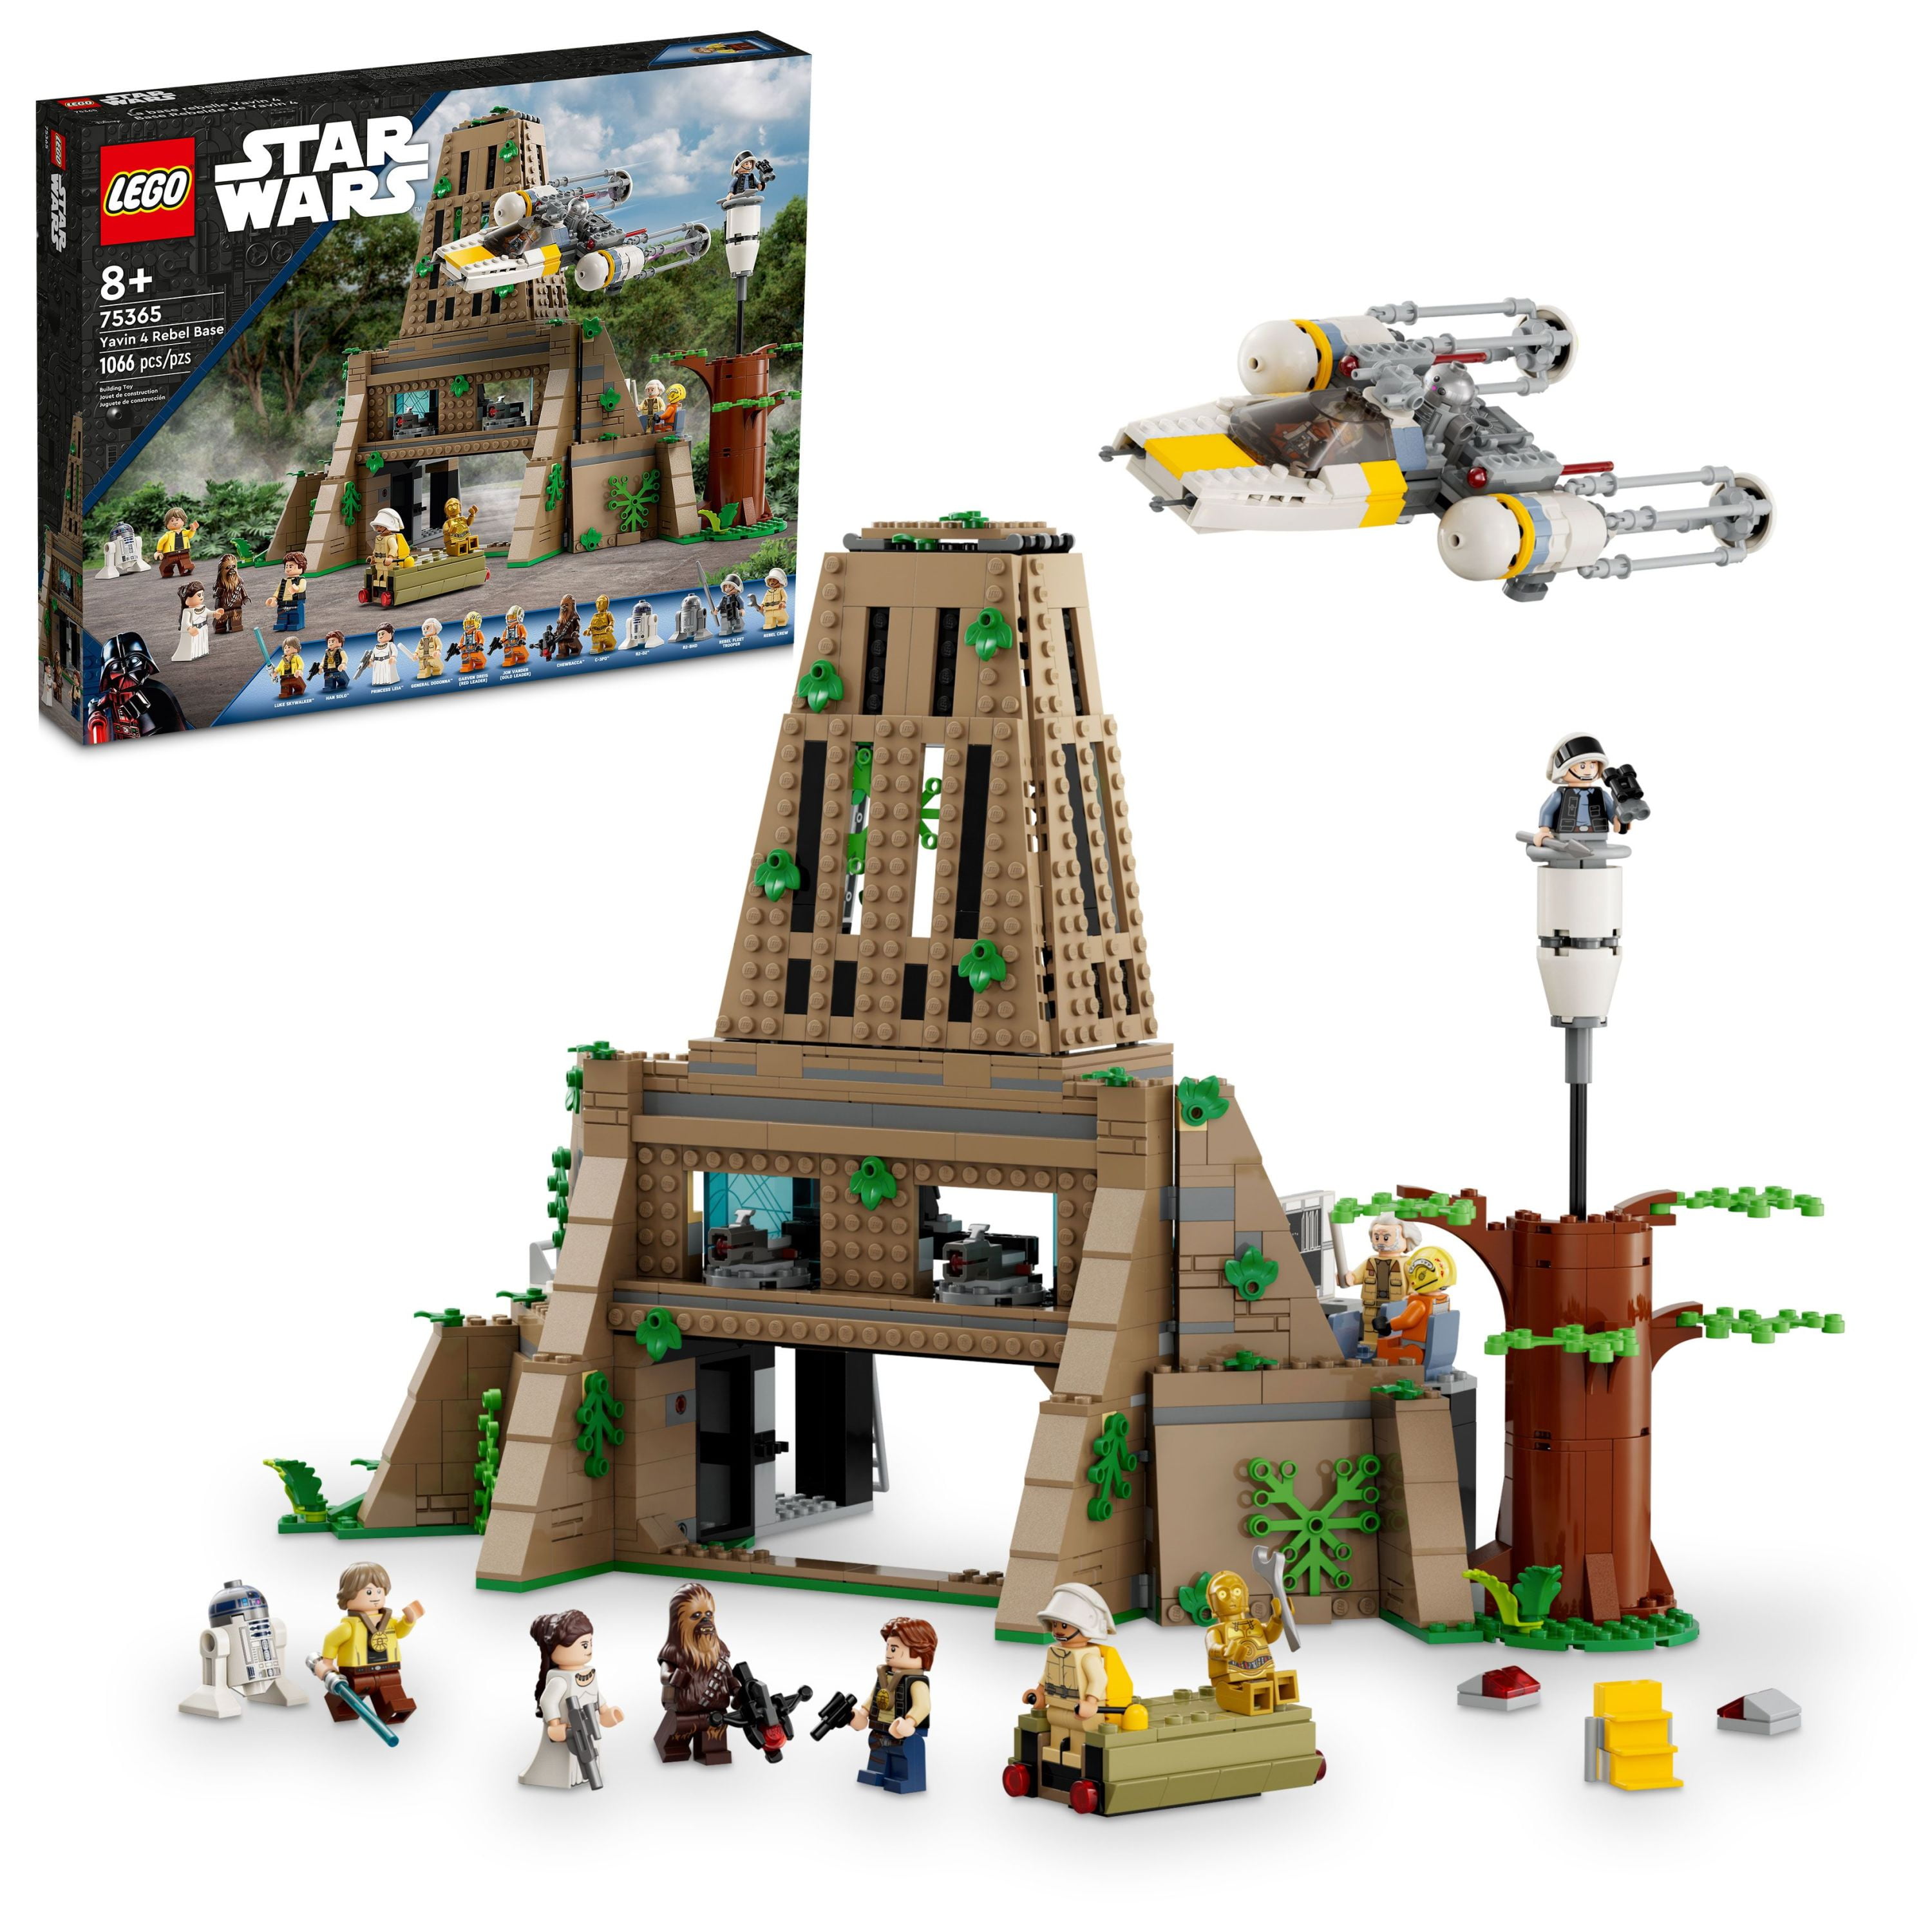 LEGO Star Wars A New Hope Yavin 4 Rebel Base 75365, Star Wars Playset  Featuring a Command Room, Medal Ceremony Stage, Y-wing Starfighter, 12 Star  Wars